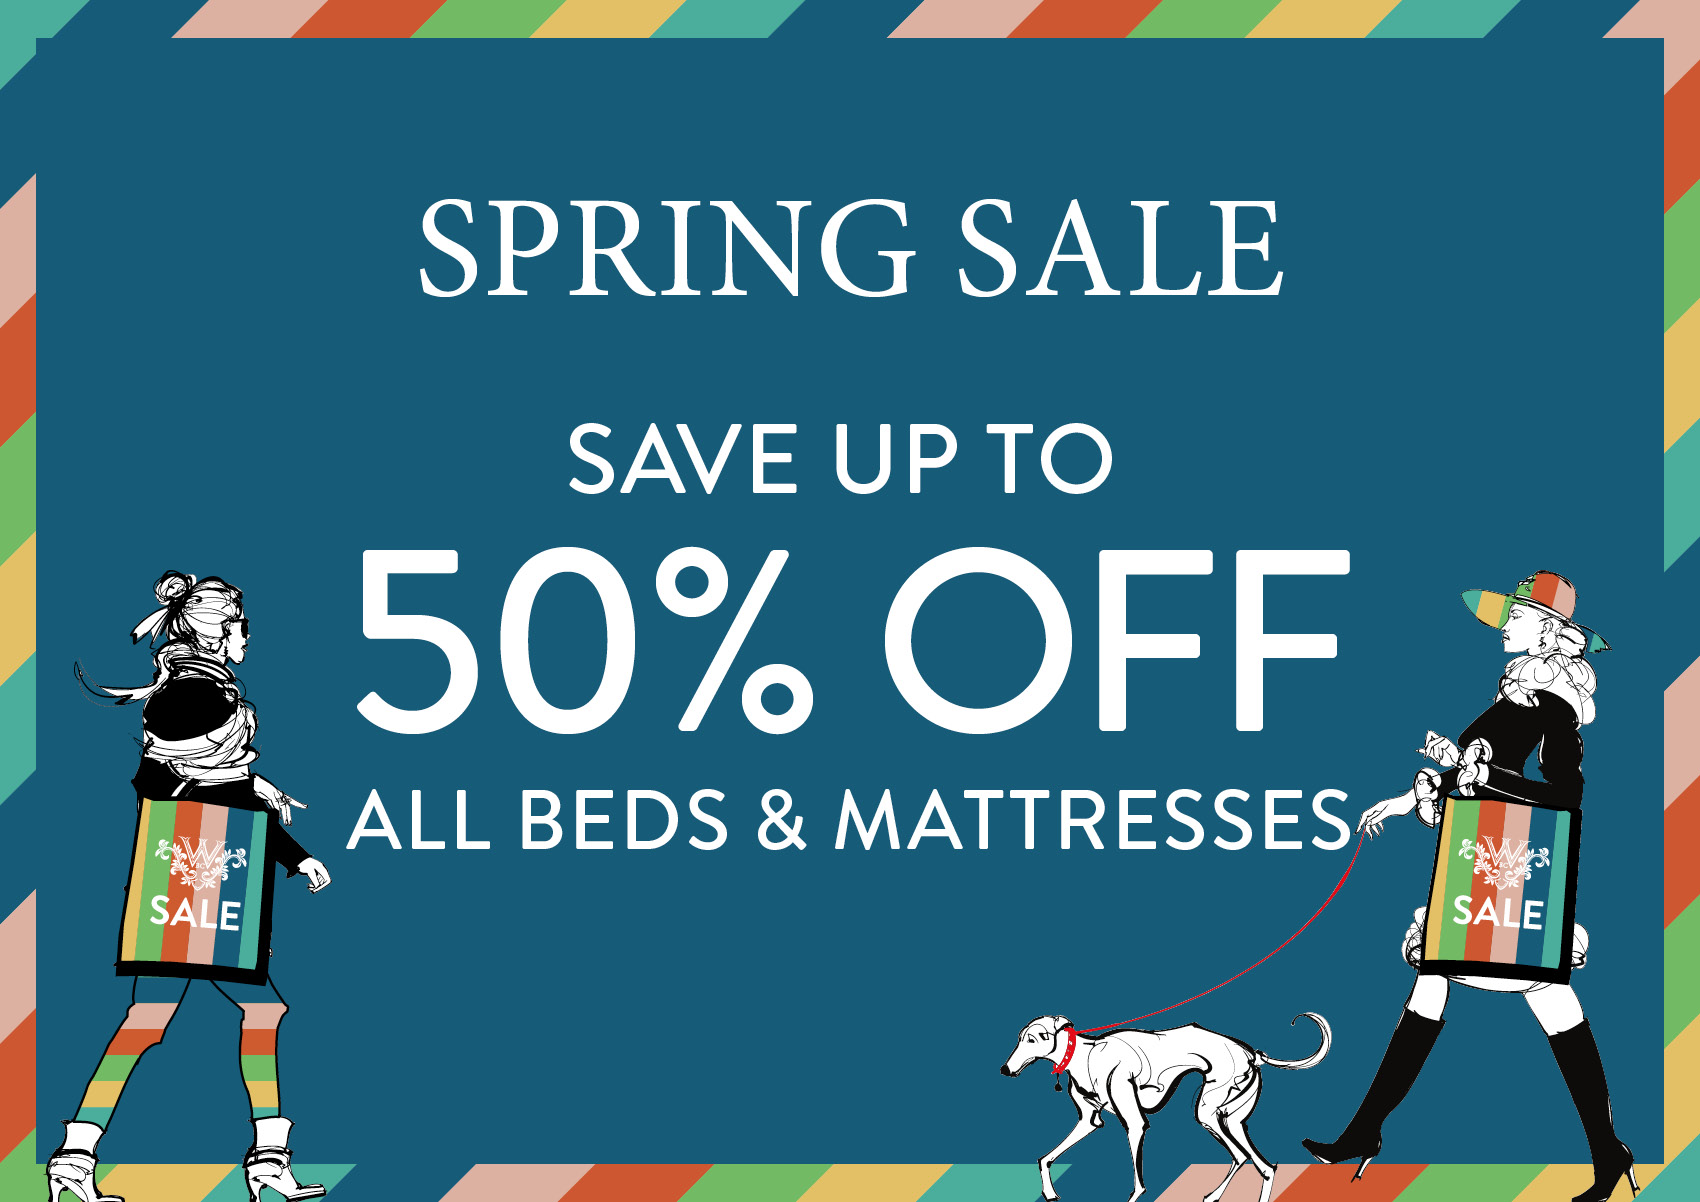 SPRING SALE - Save up to 50% OFF All beds & mattresses